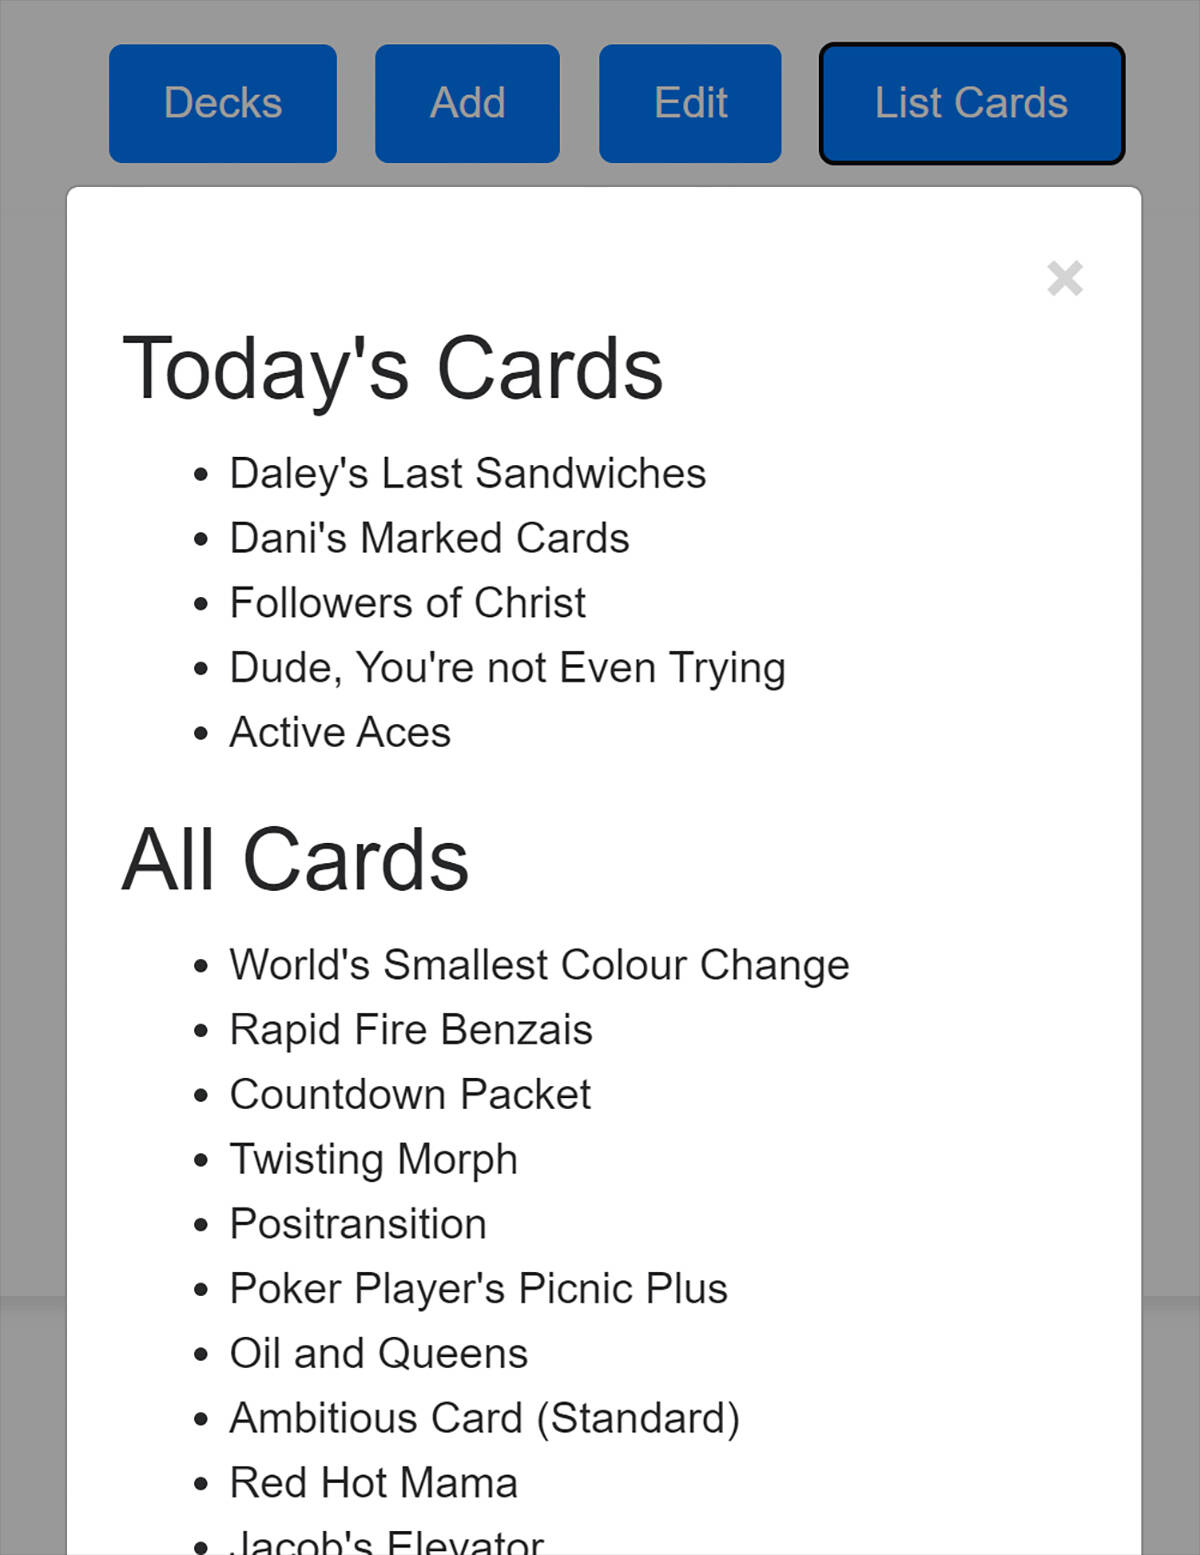 The "List Cards" display in my flash cards app.